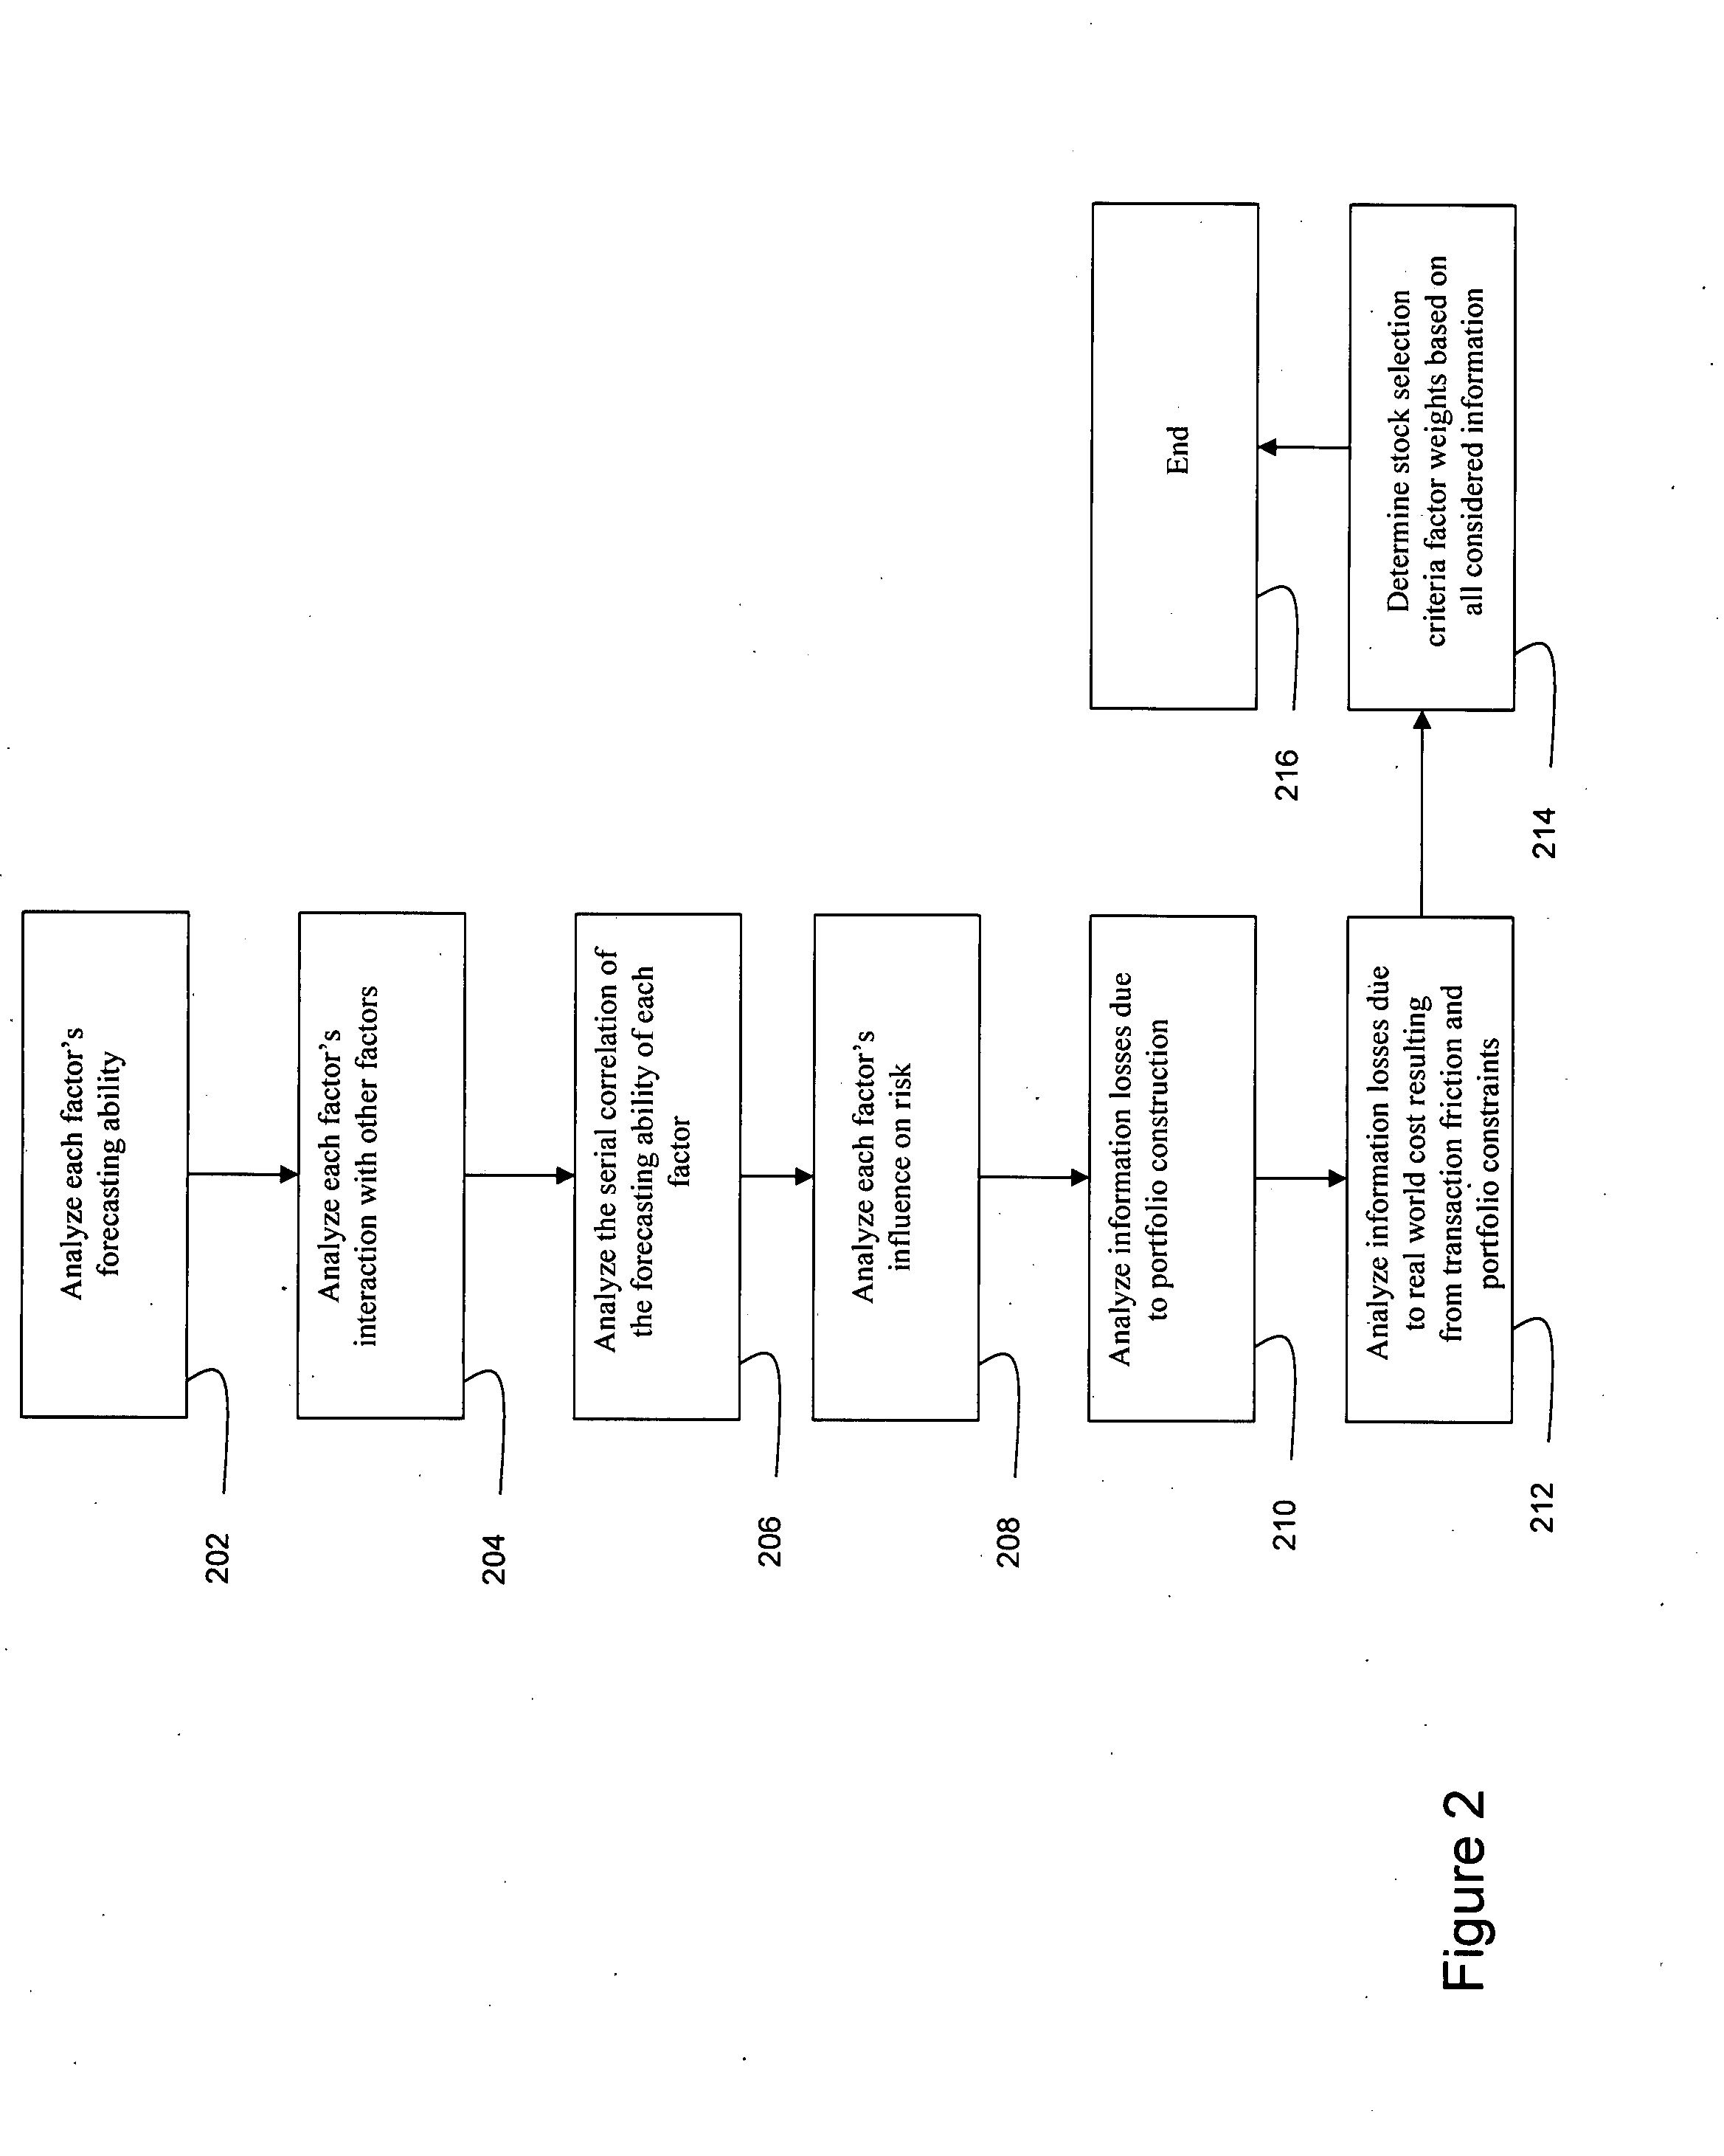 Method and system for identification and analysis of investment assets